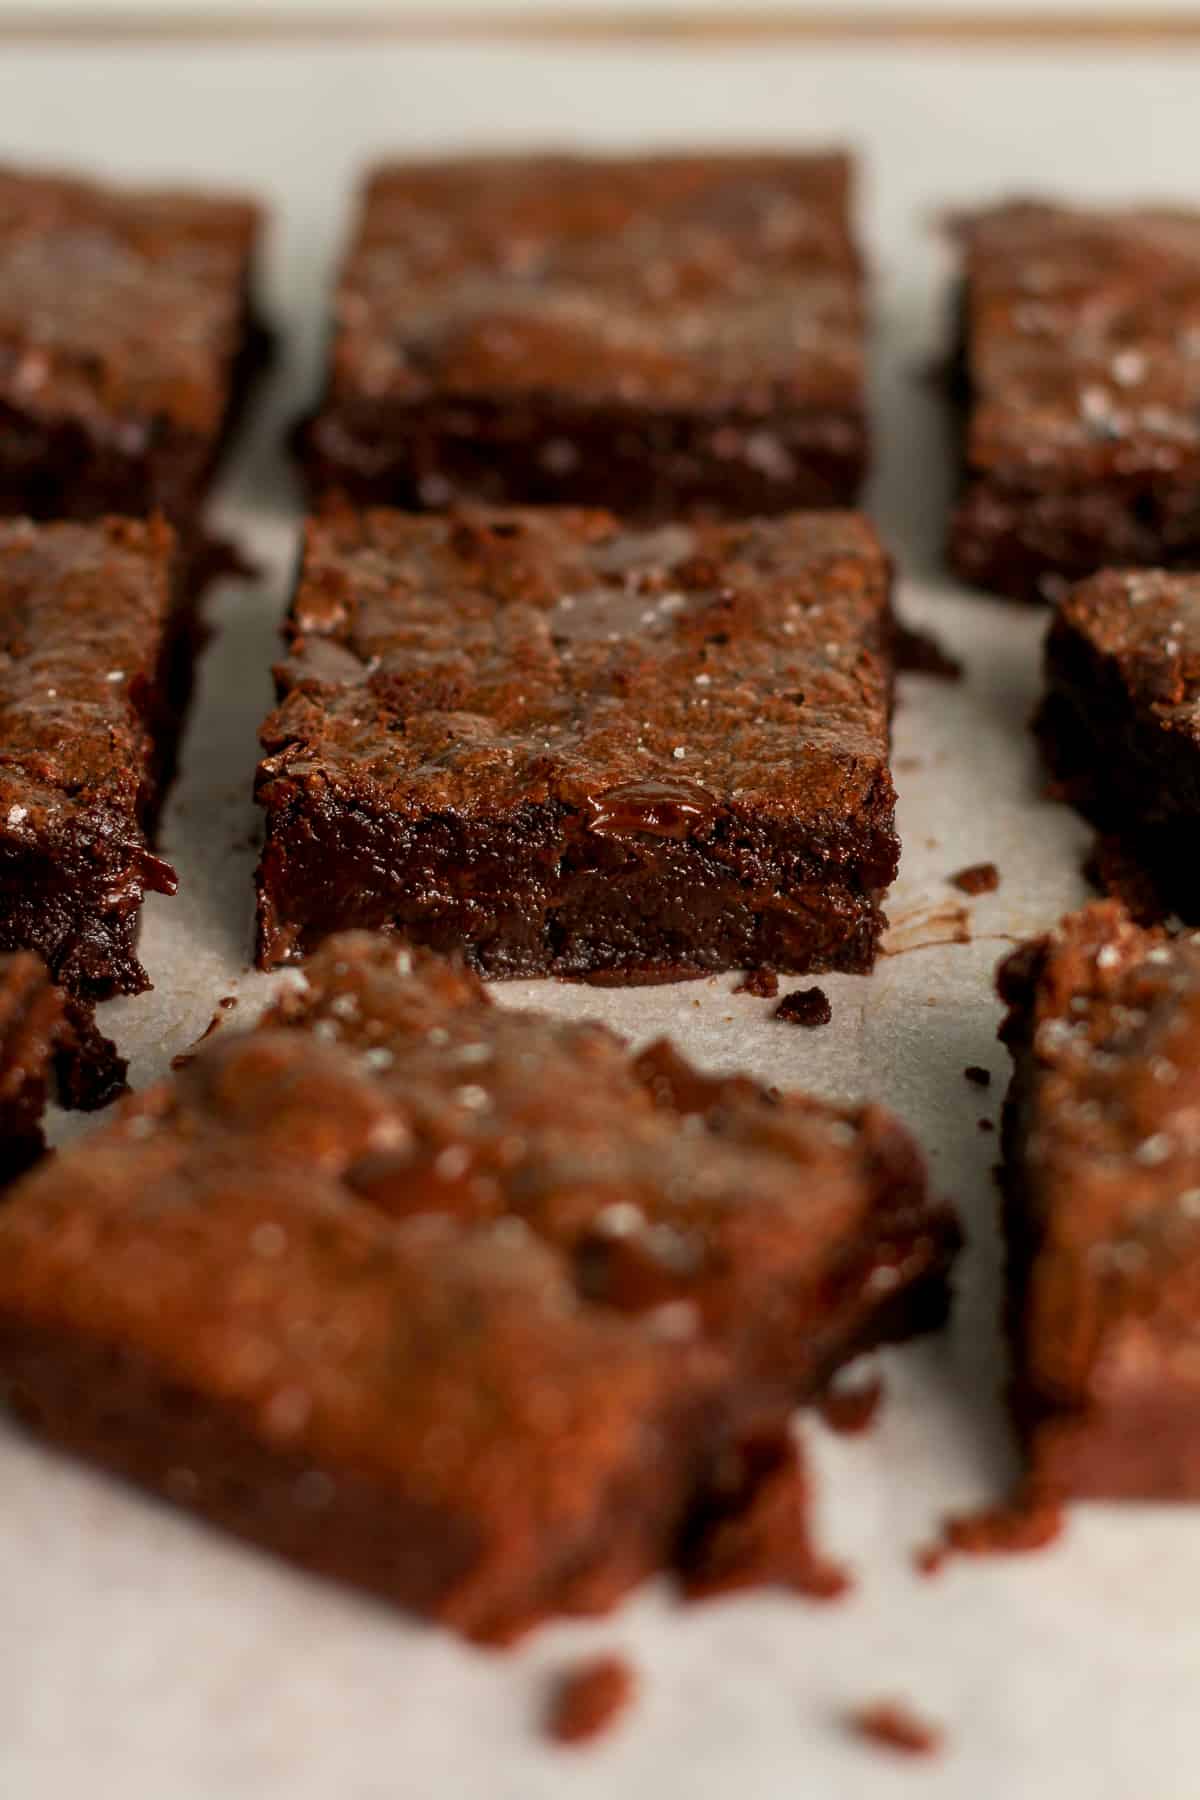 Side view of some sliced brownies pulled apart from each other.